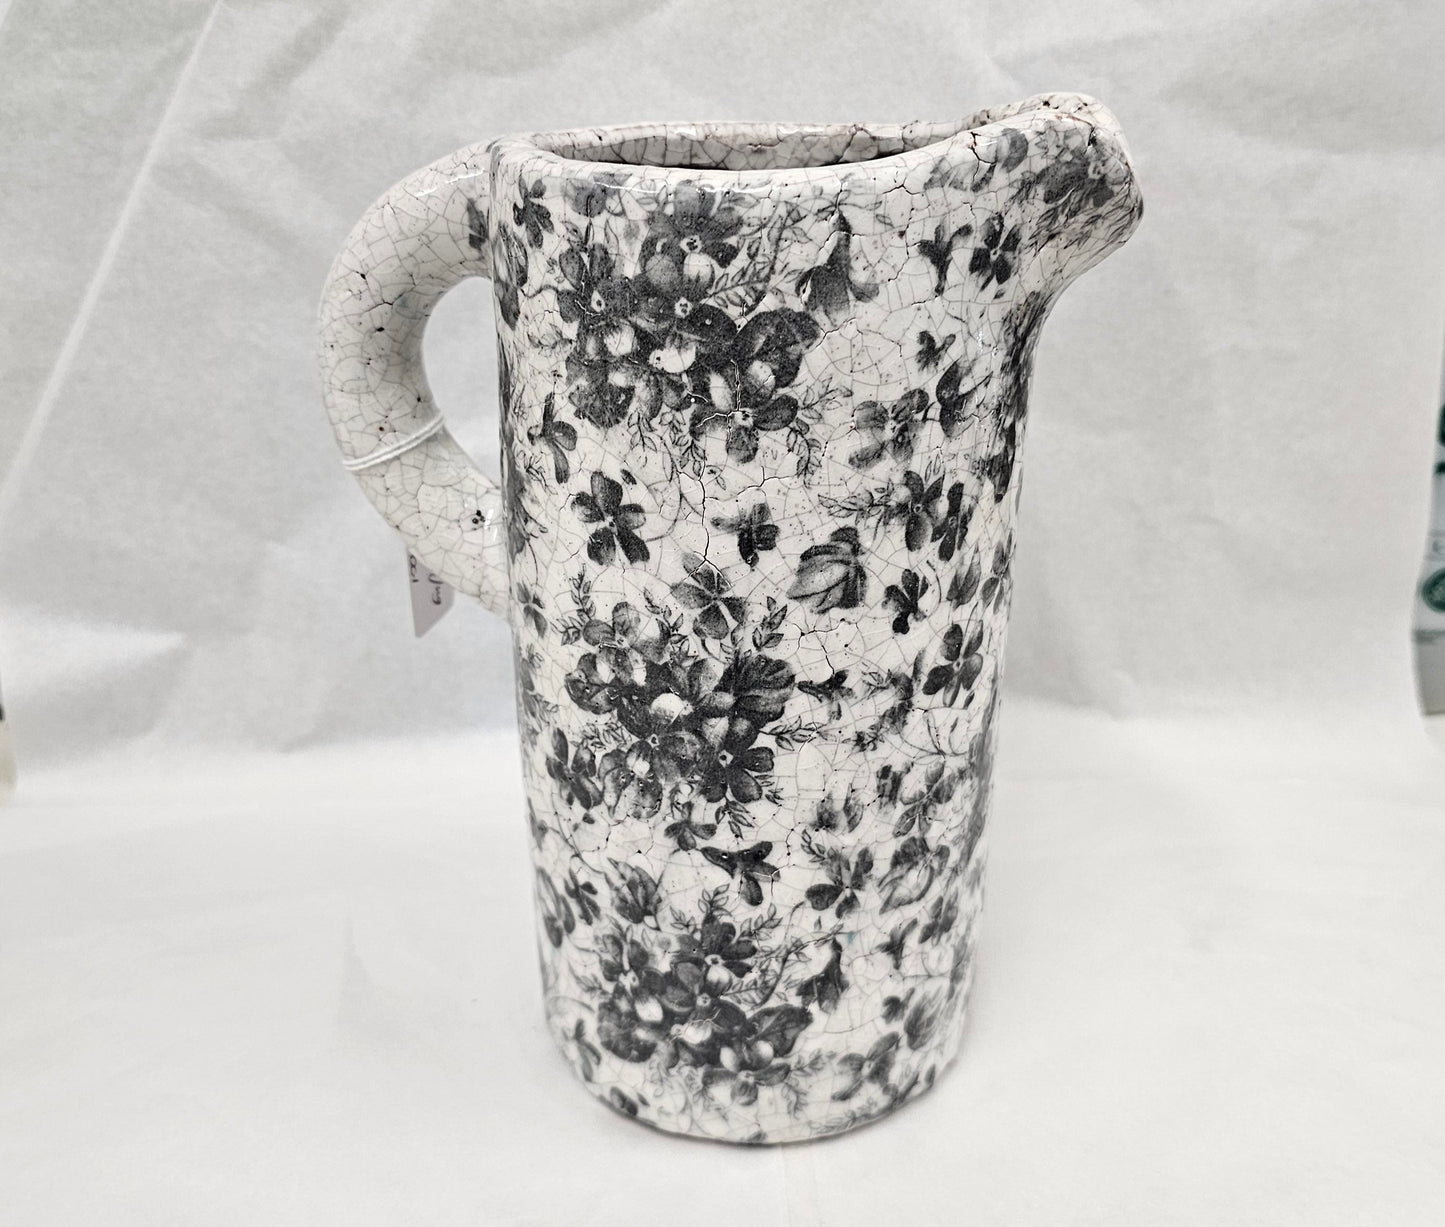 Cream ceramic jug with dark grey floral decoration. Great for home decoration with cut flowers or as an attractive decorative piece on its own